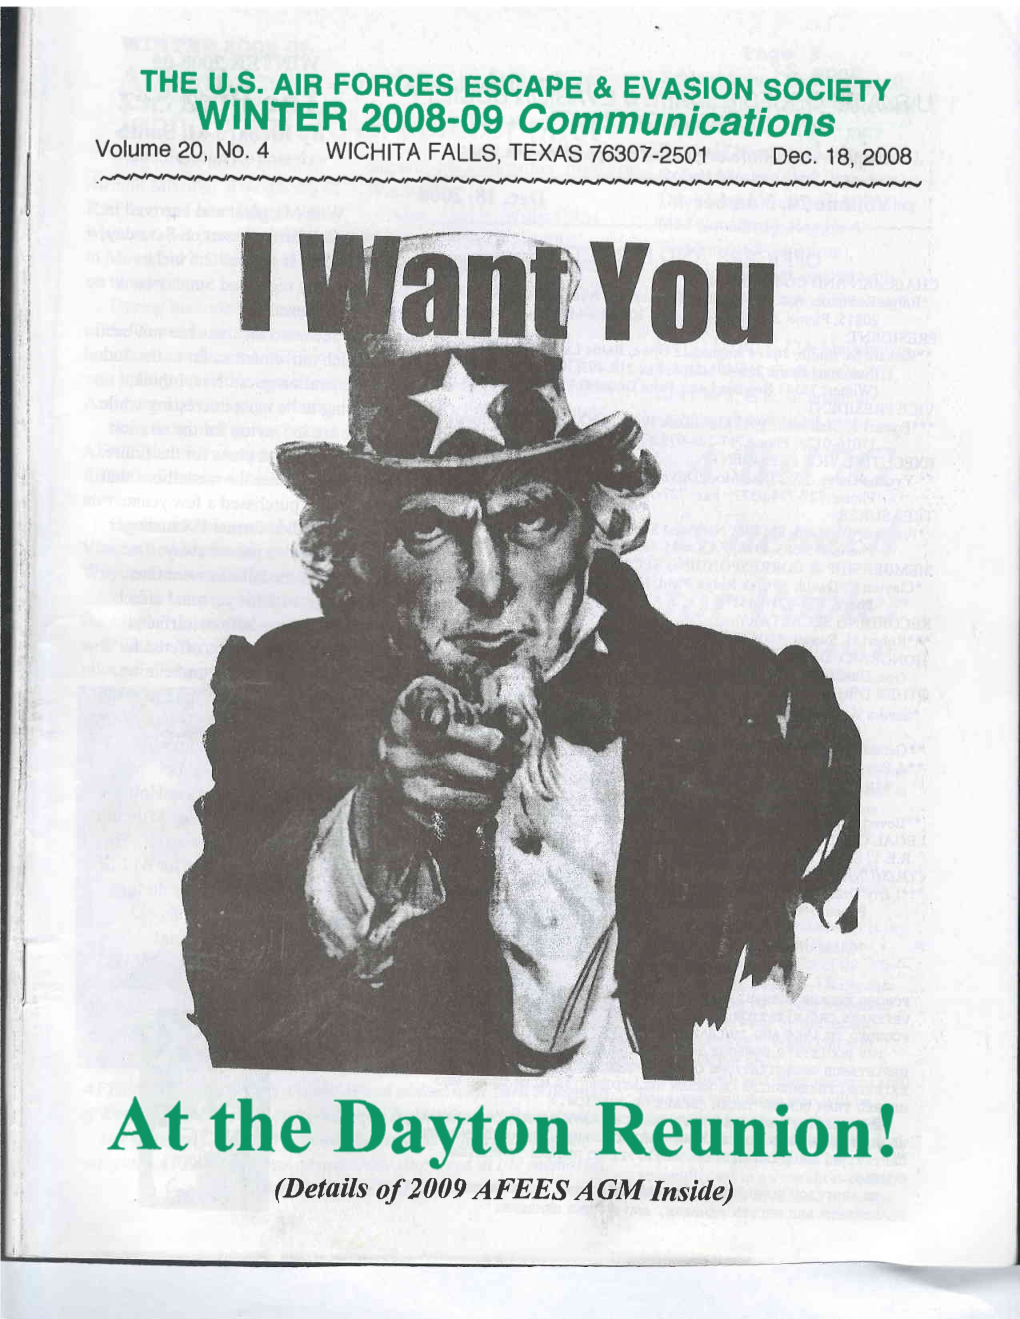 At the Dilyton Reunion! (Detuils of 2009 AFEES AGM Inside) Page 2 WINTER 2M&U) U.S